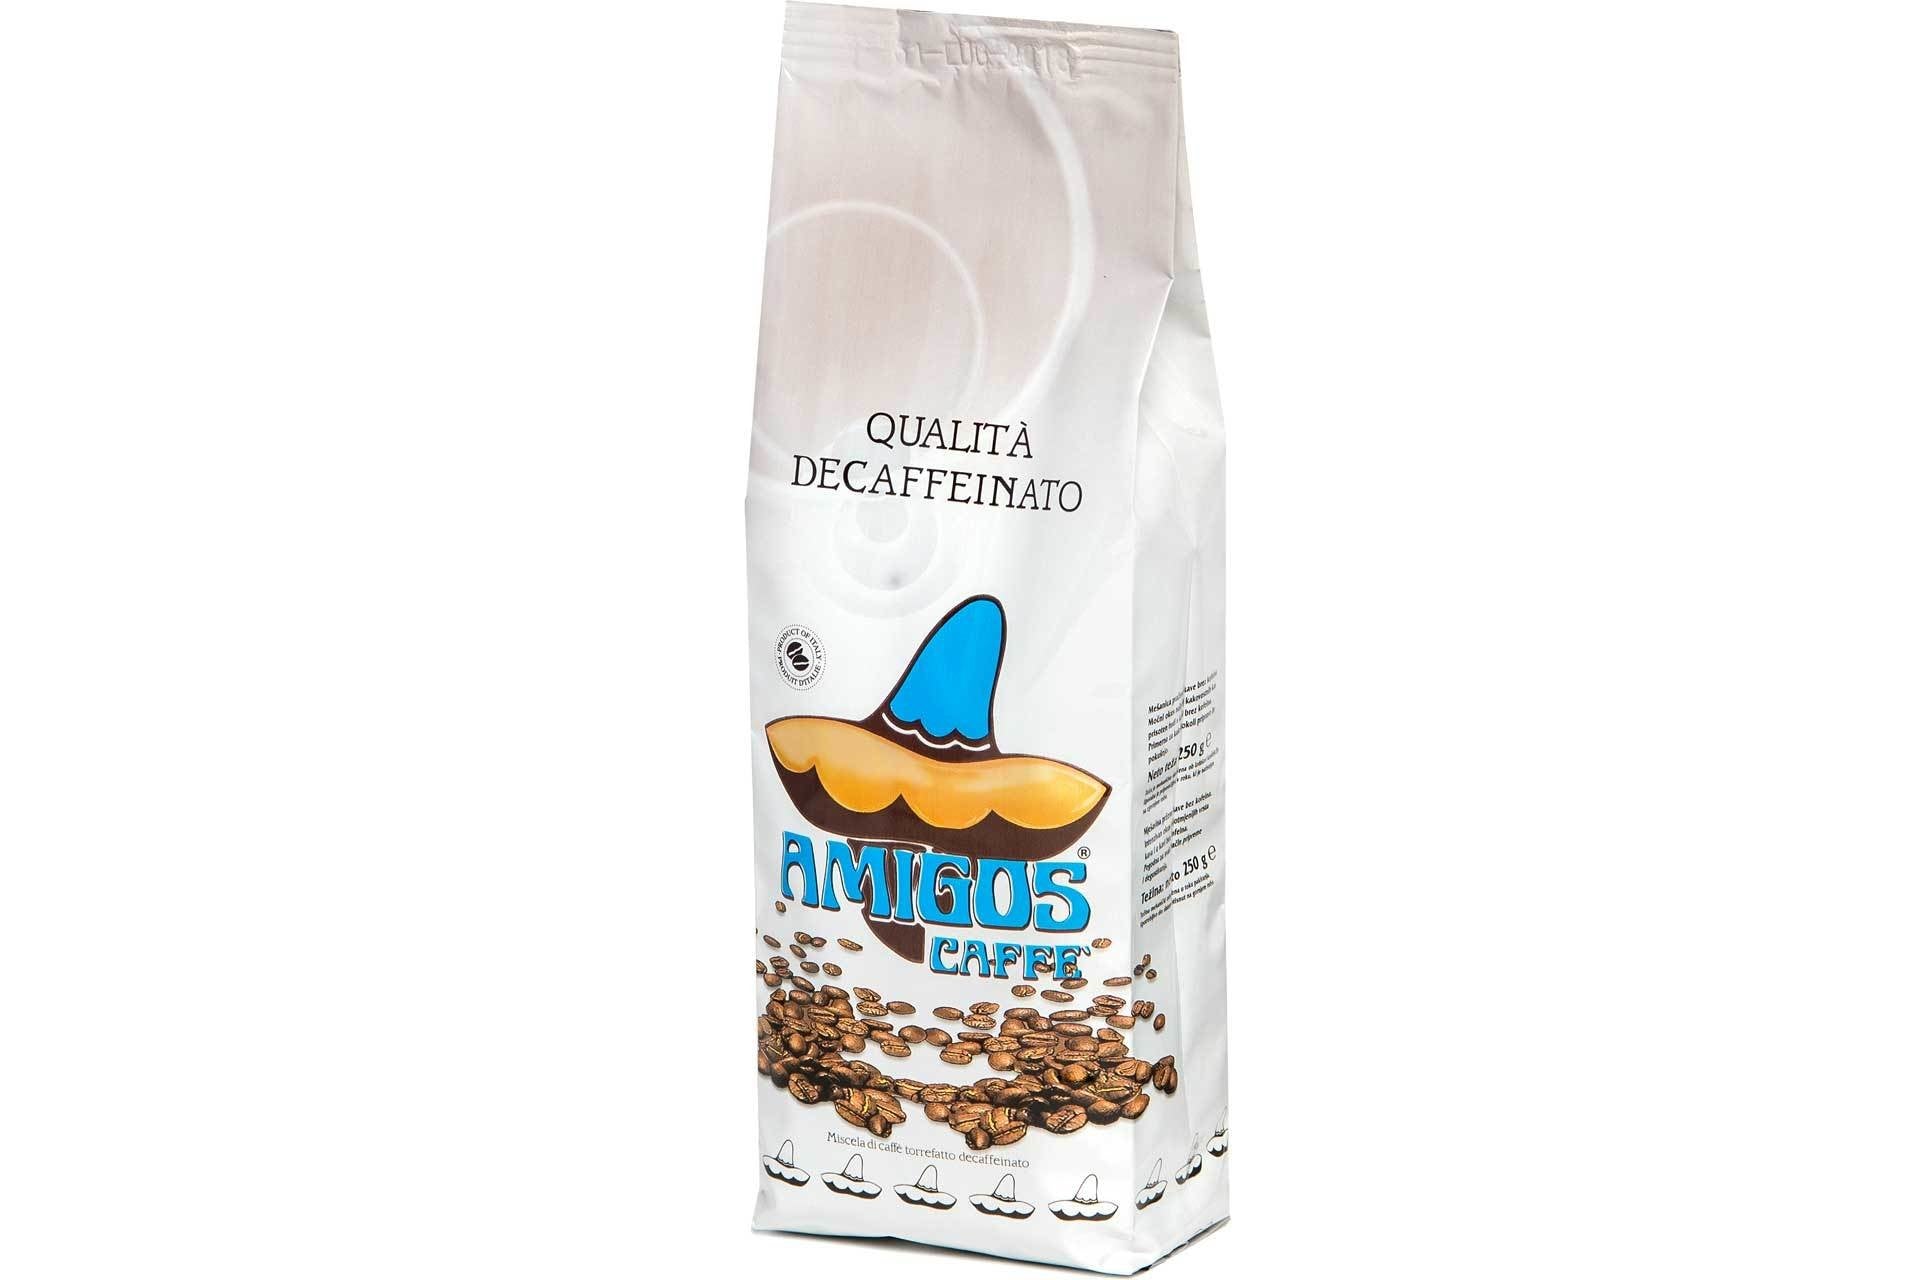 Quality Decaffeinated Beans